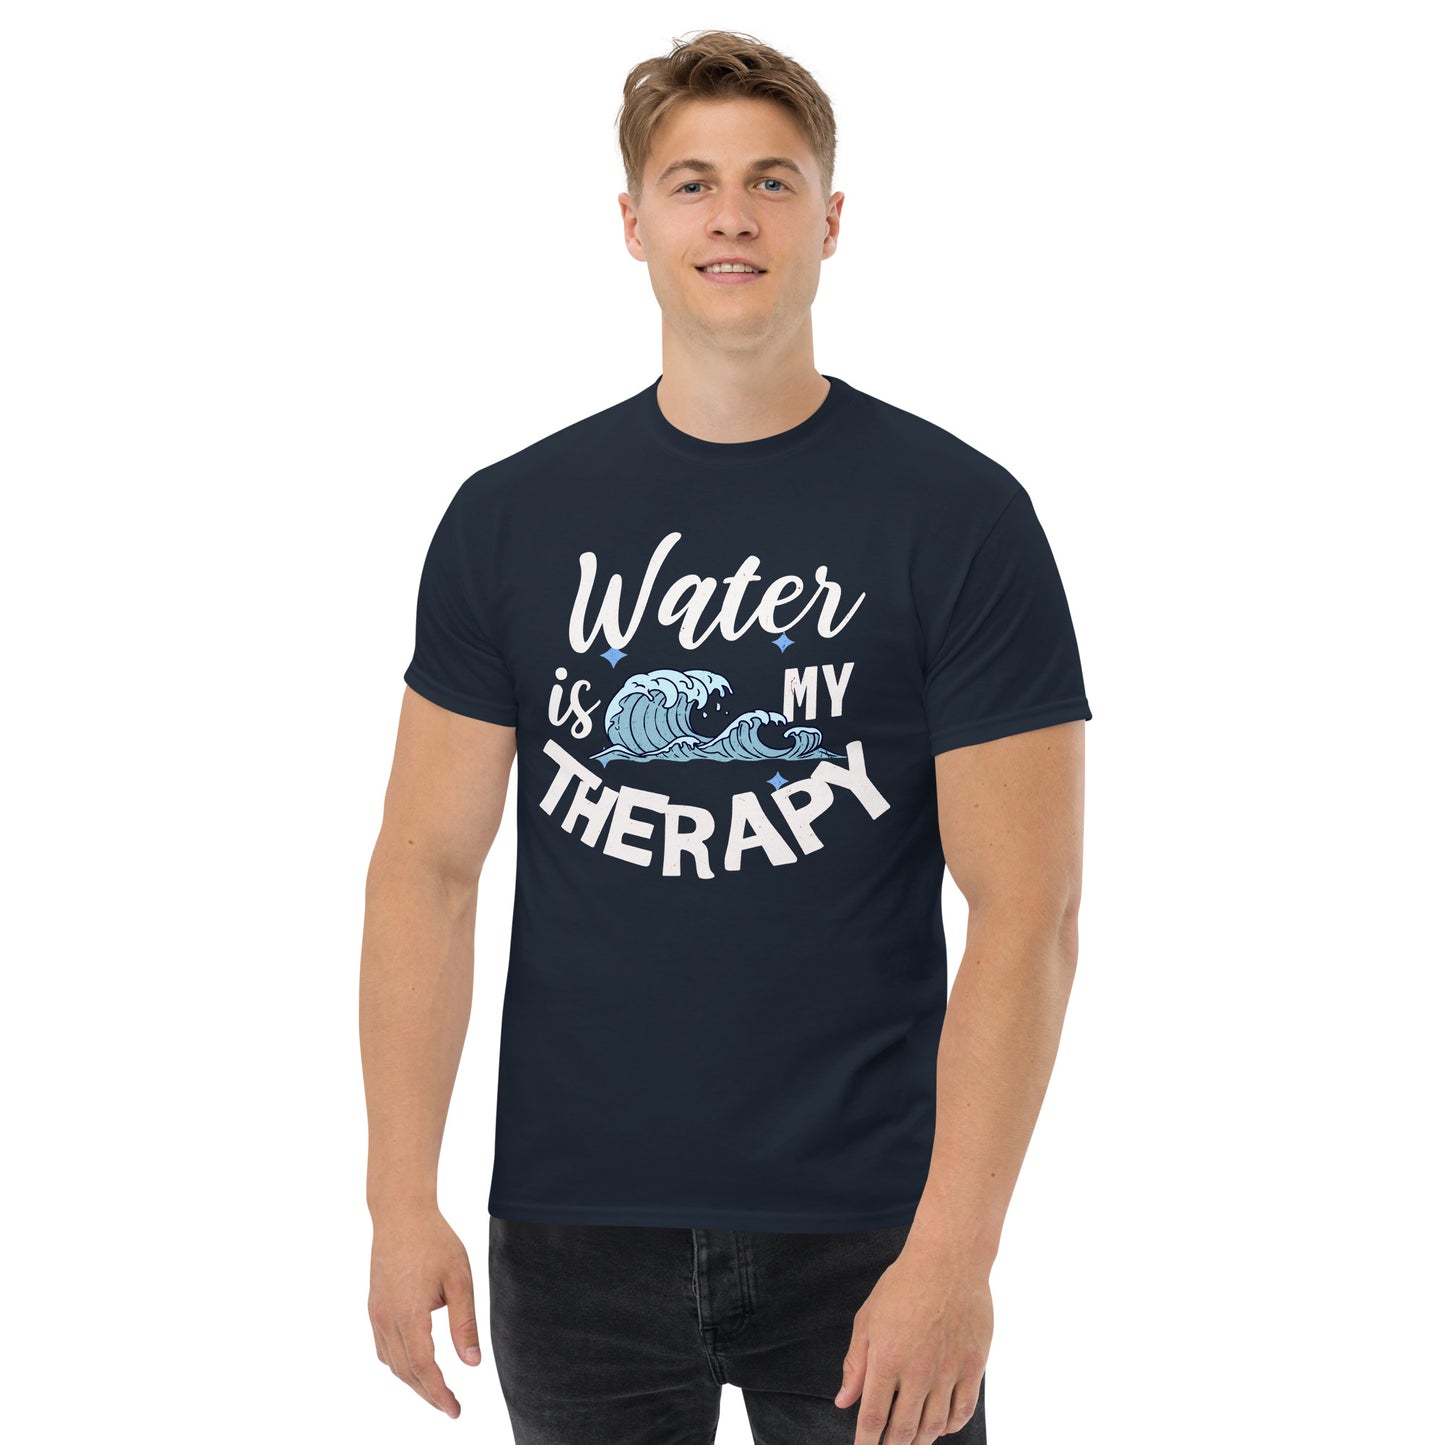 Men's Water Is My Therapy tee